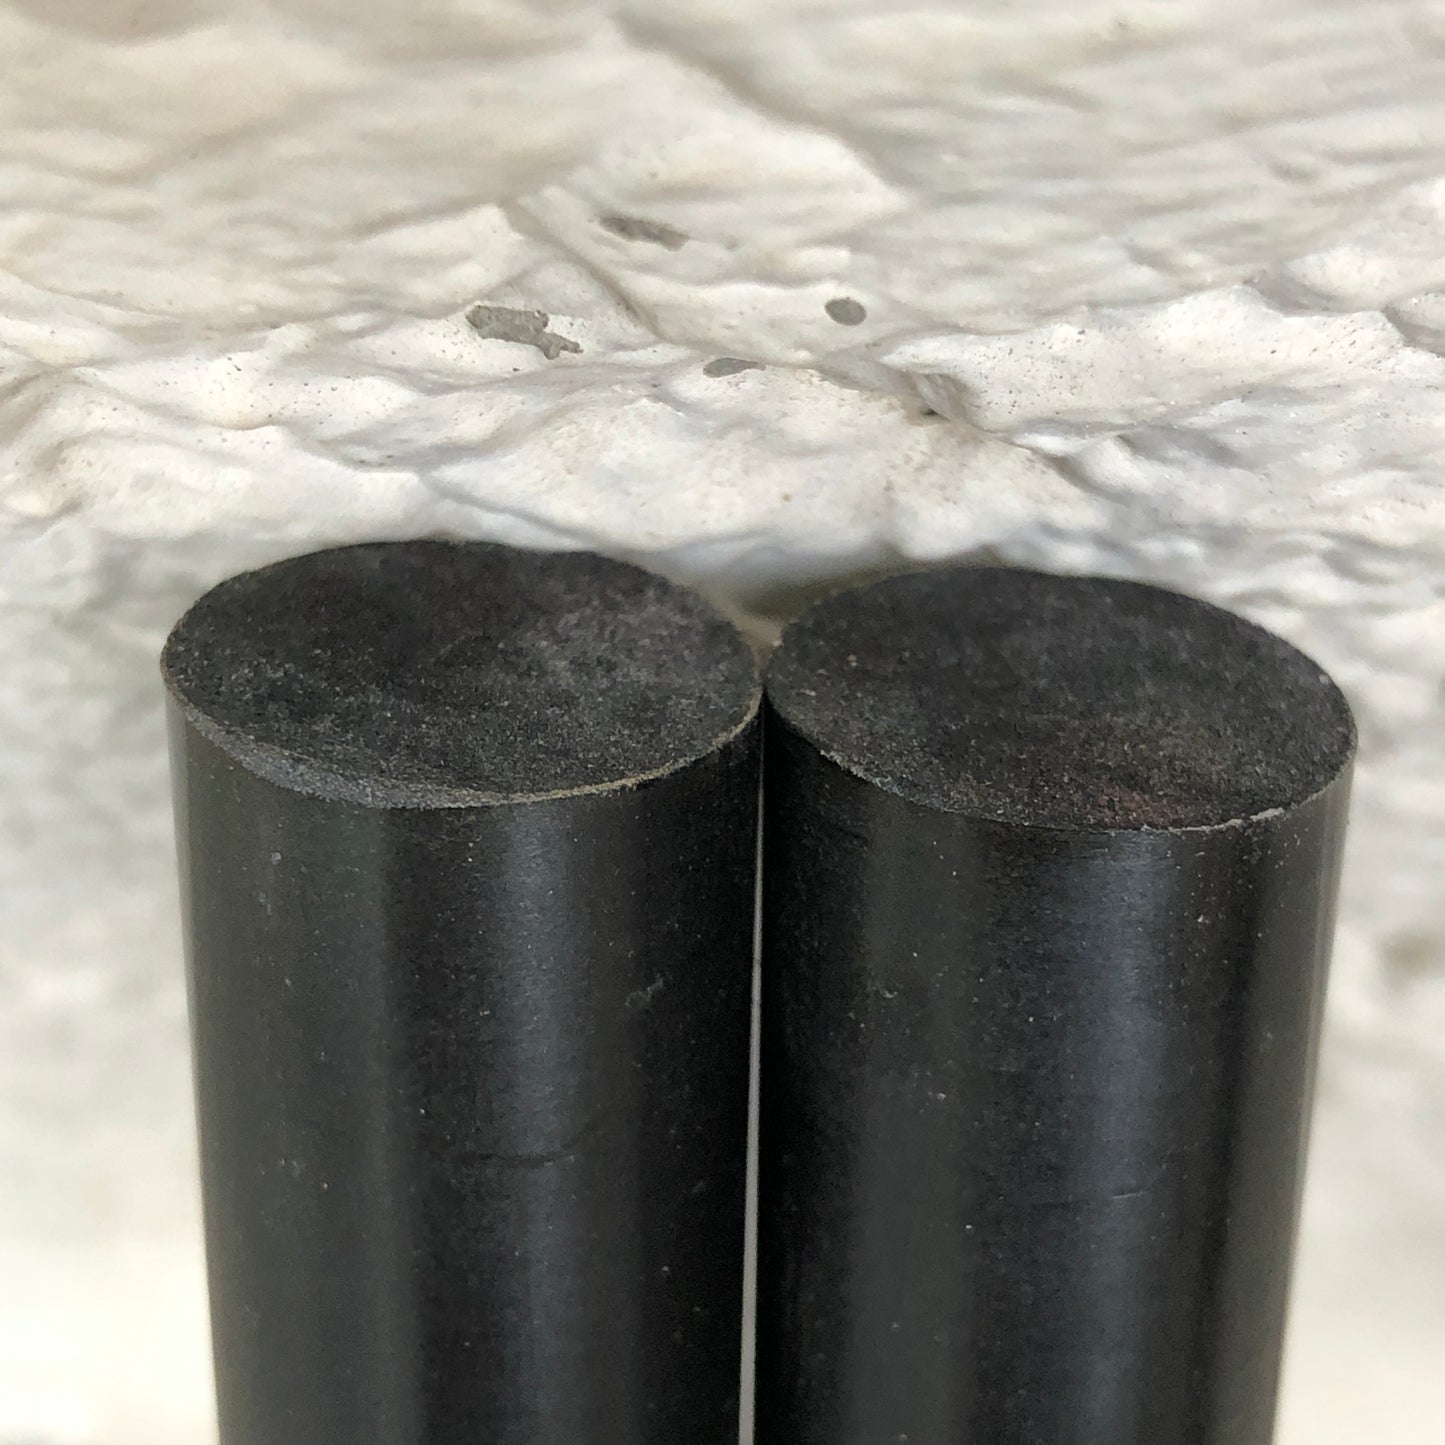 "PURE BLACK" UNPOLISHED RODS which contains carbon black for non-discoloration